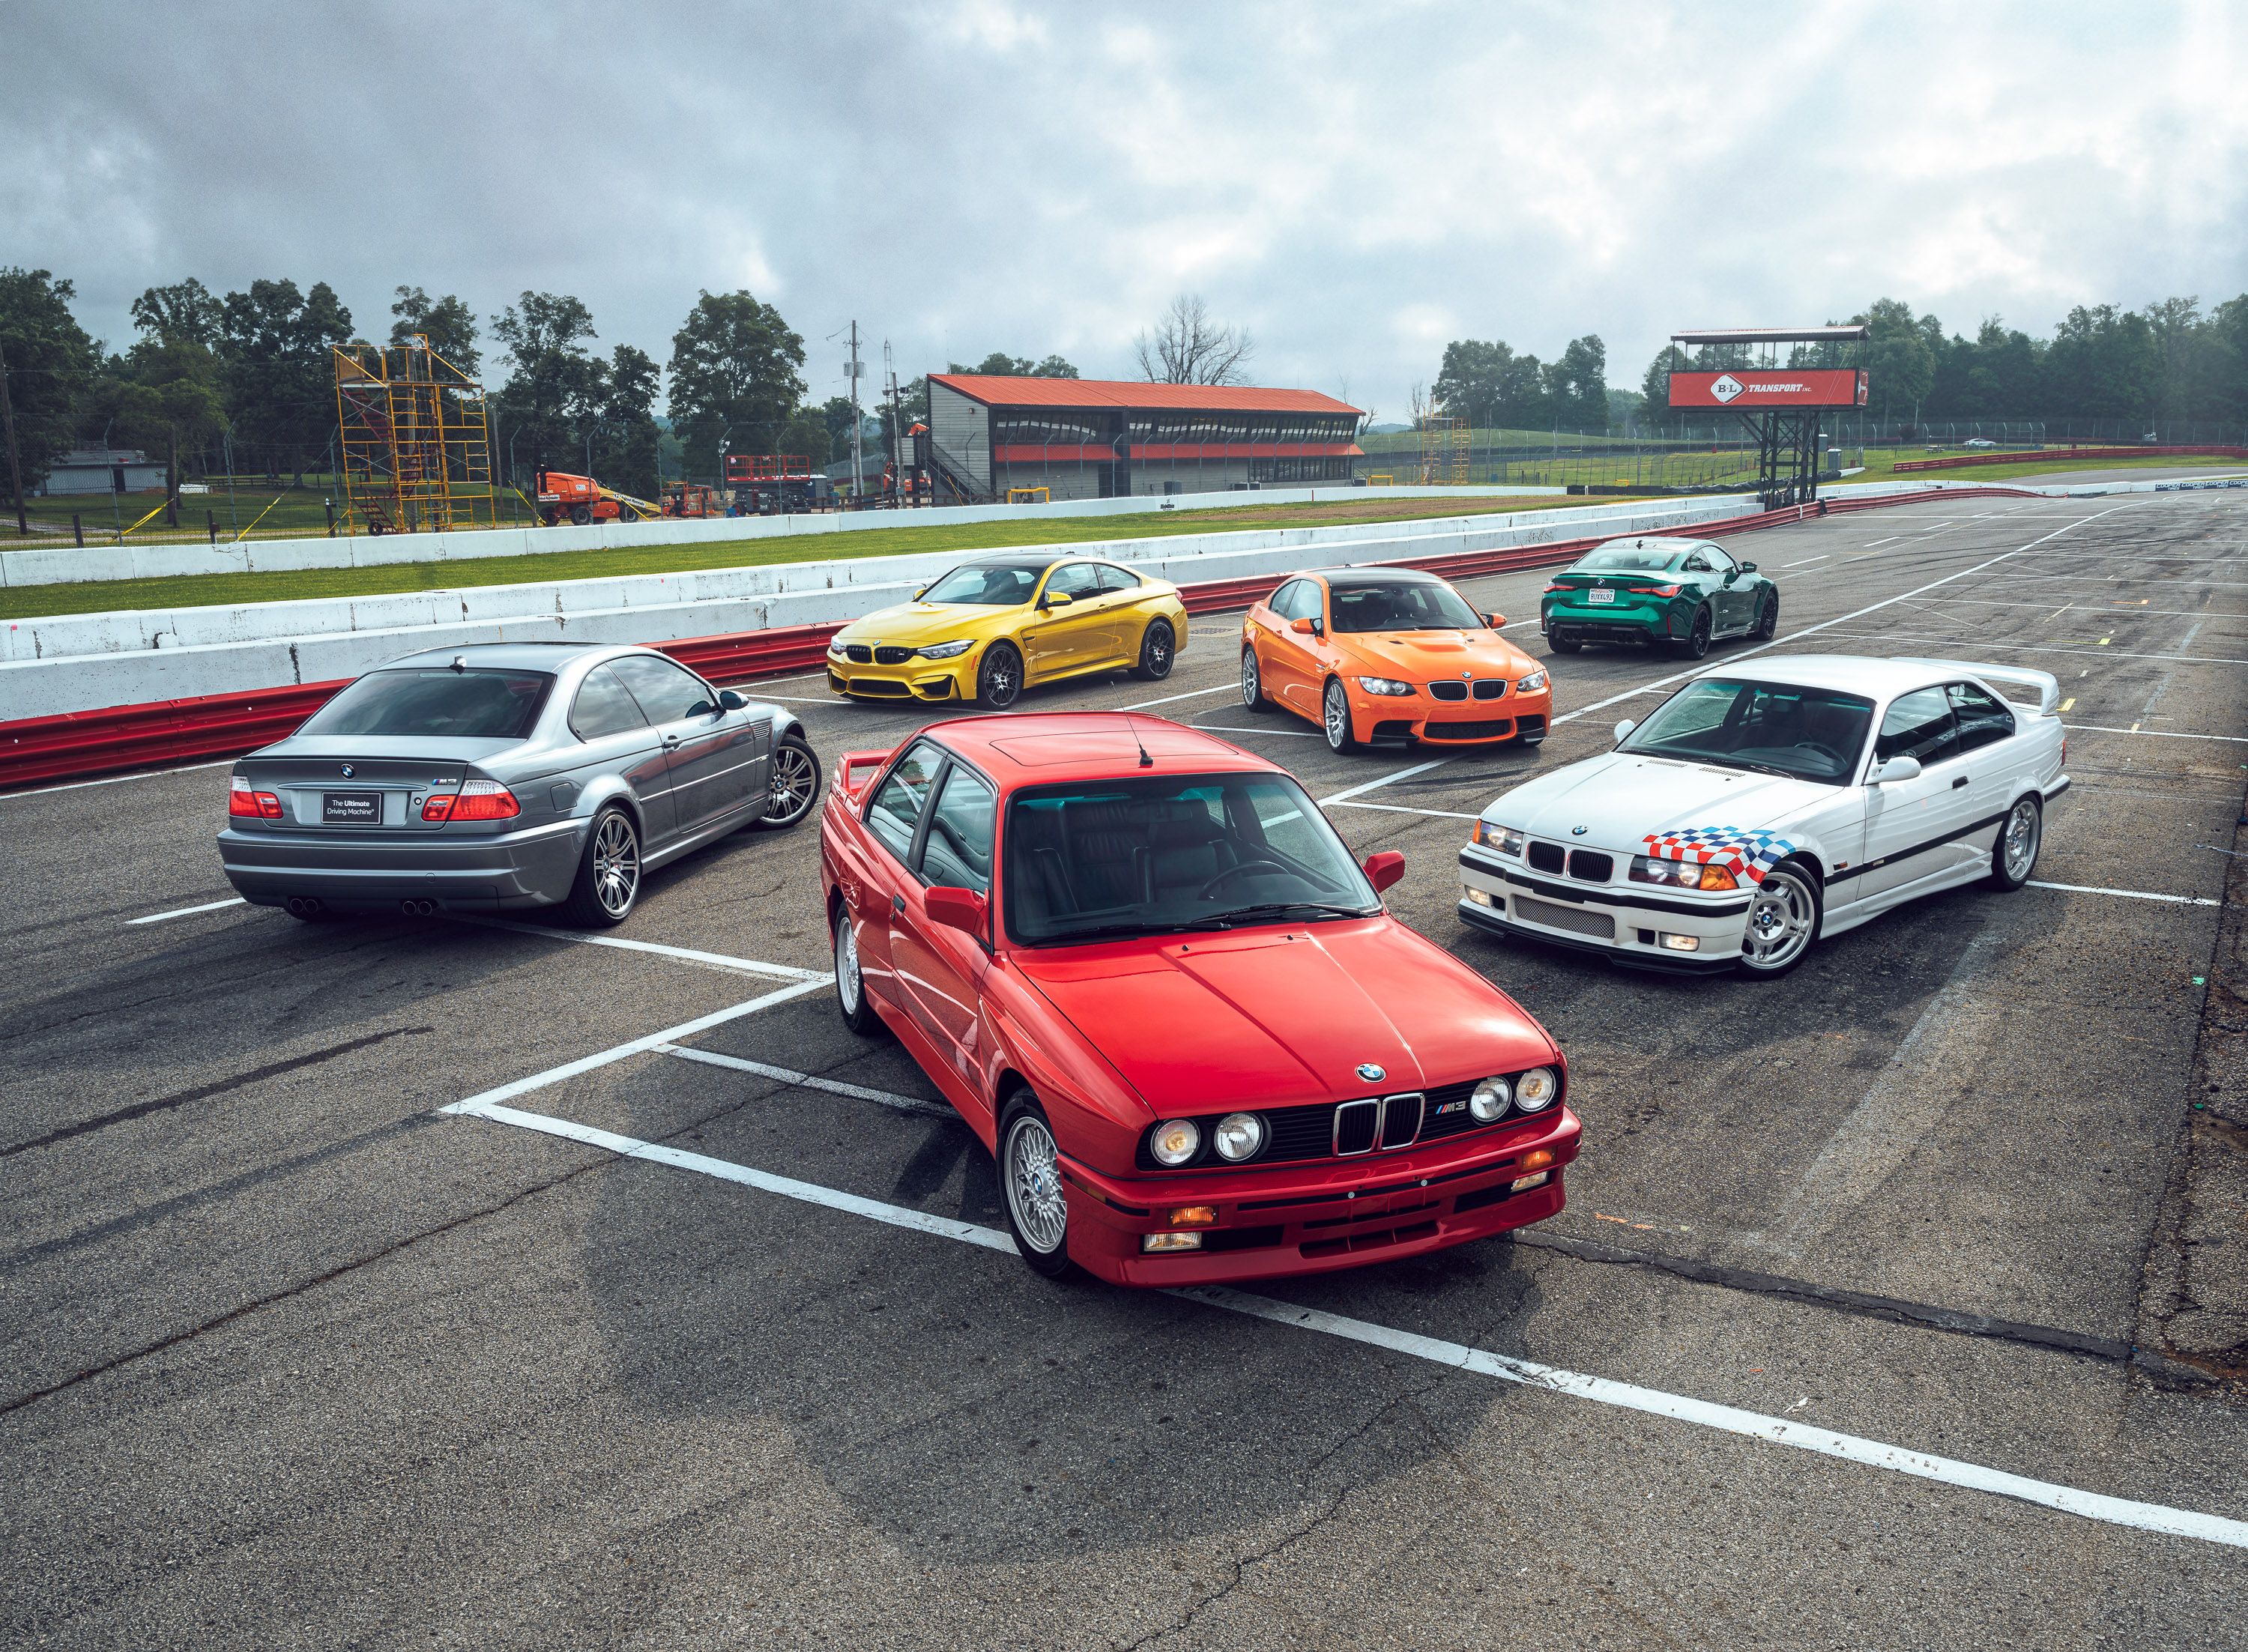 Buying Guide: BMW M3 E30 (1986 - 1992)